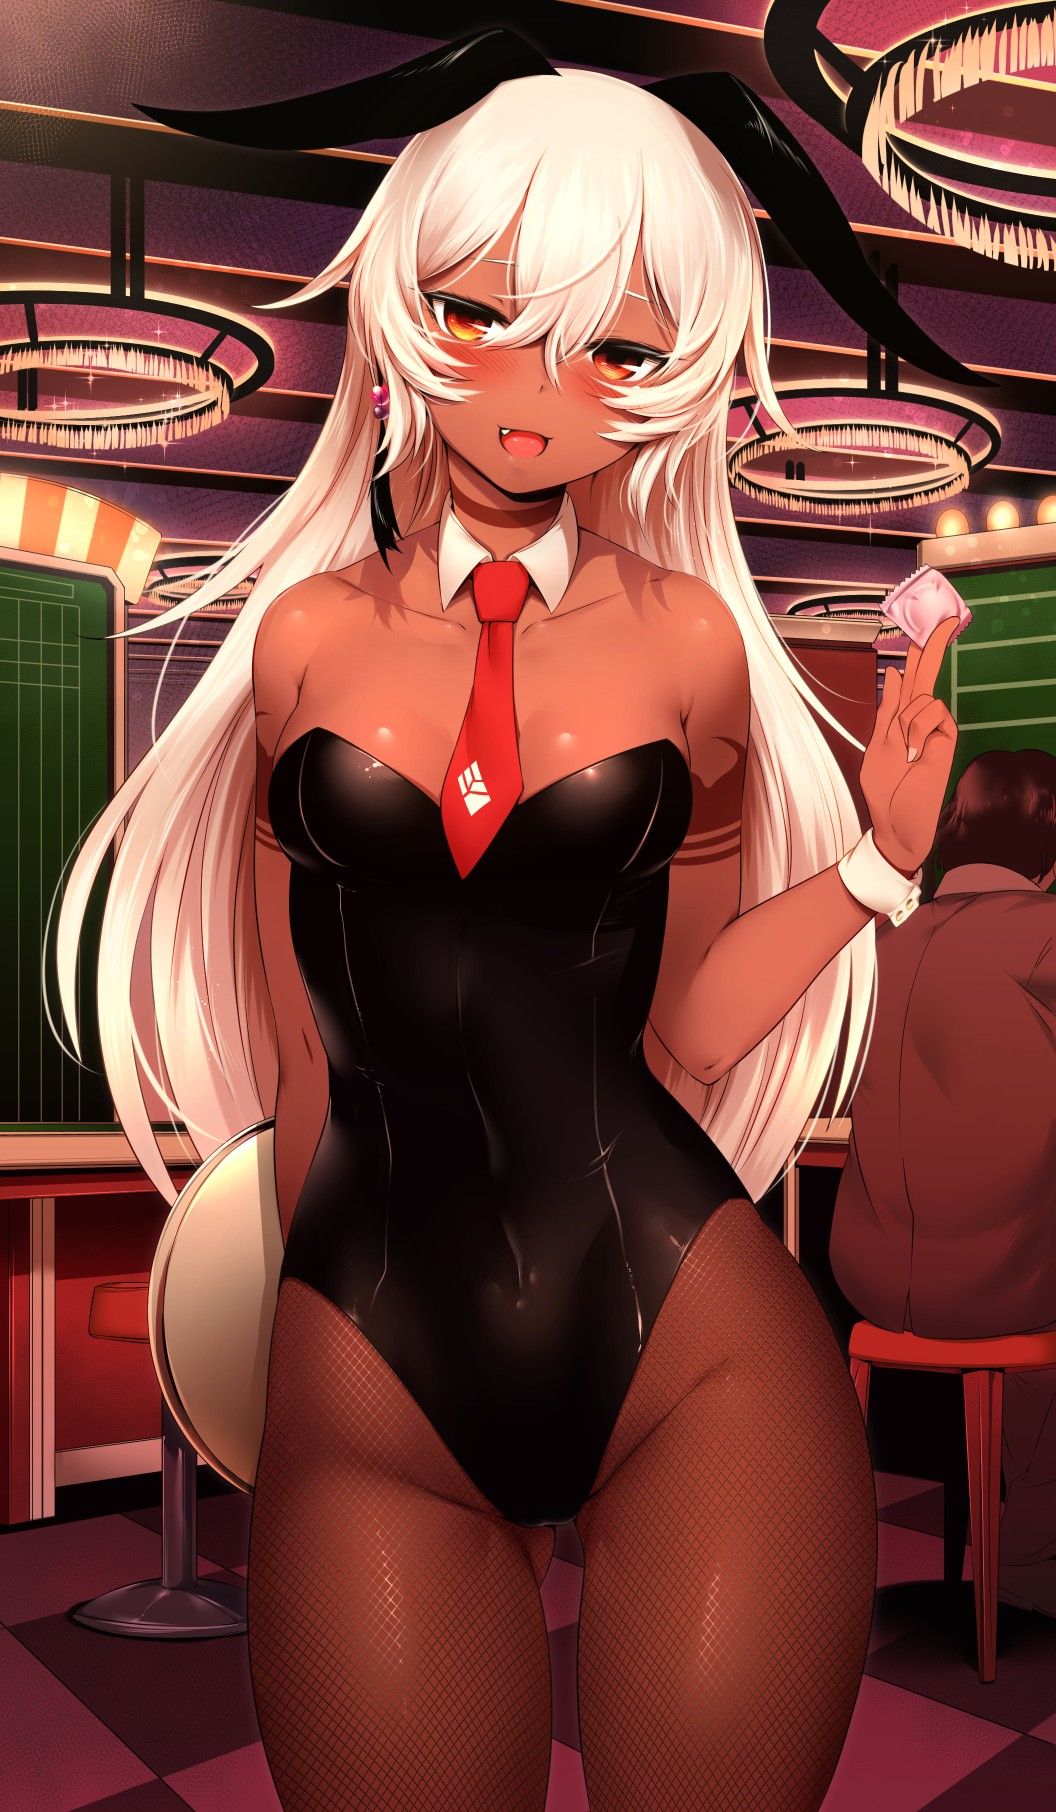 Bunny's lewdness is abnormal That clothes what 16